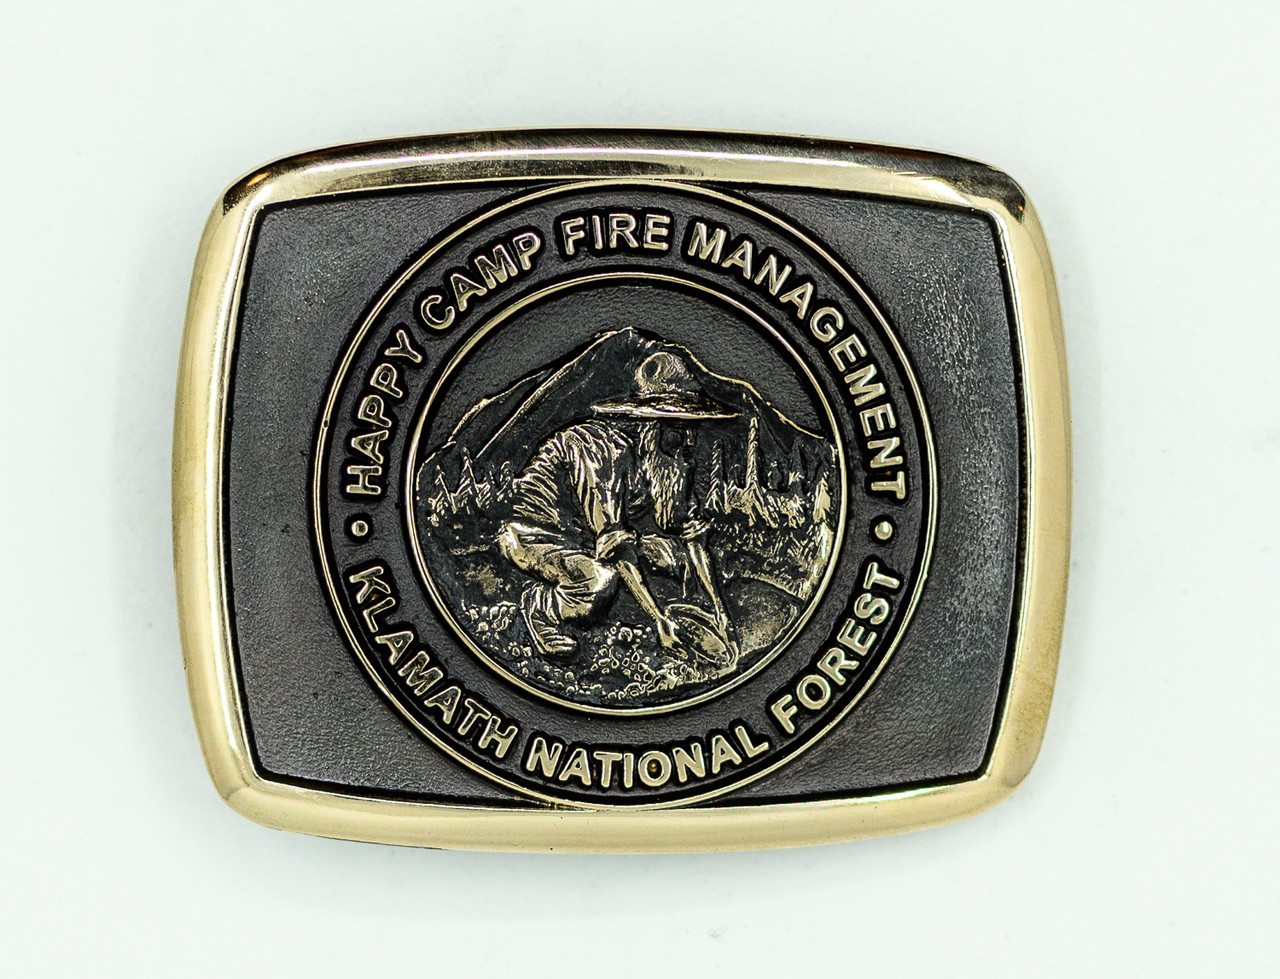 Happy Camp Fire Management Buckle (RESTRICTED)